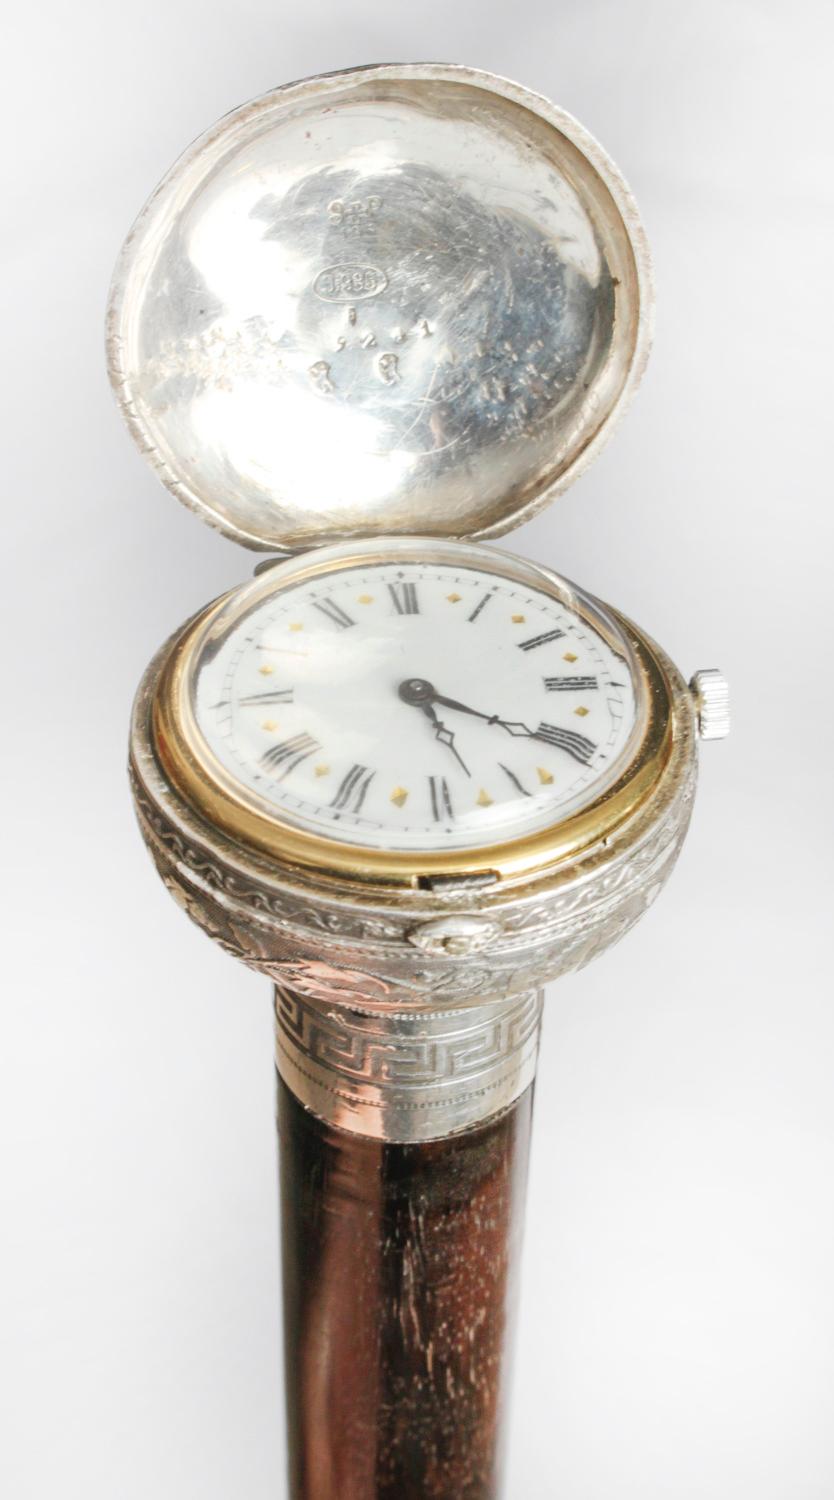 This is a beautiful and distinctive antique French Gentlemans ebonised opera cane walking stick with the exquisite silver watch fashioned into the handle, dating from Circa 1880.
 
The watch having a decorative silvered dial and cylinder